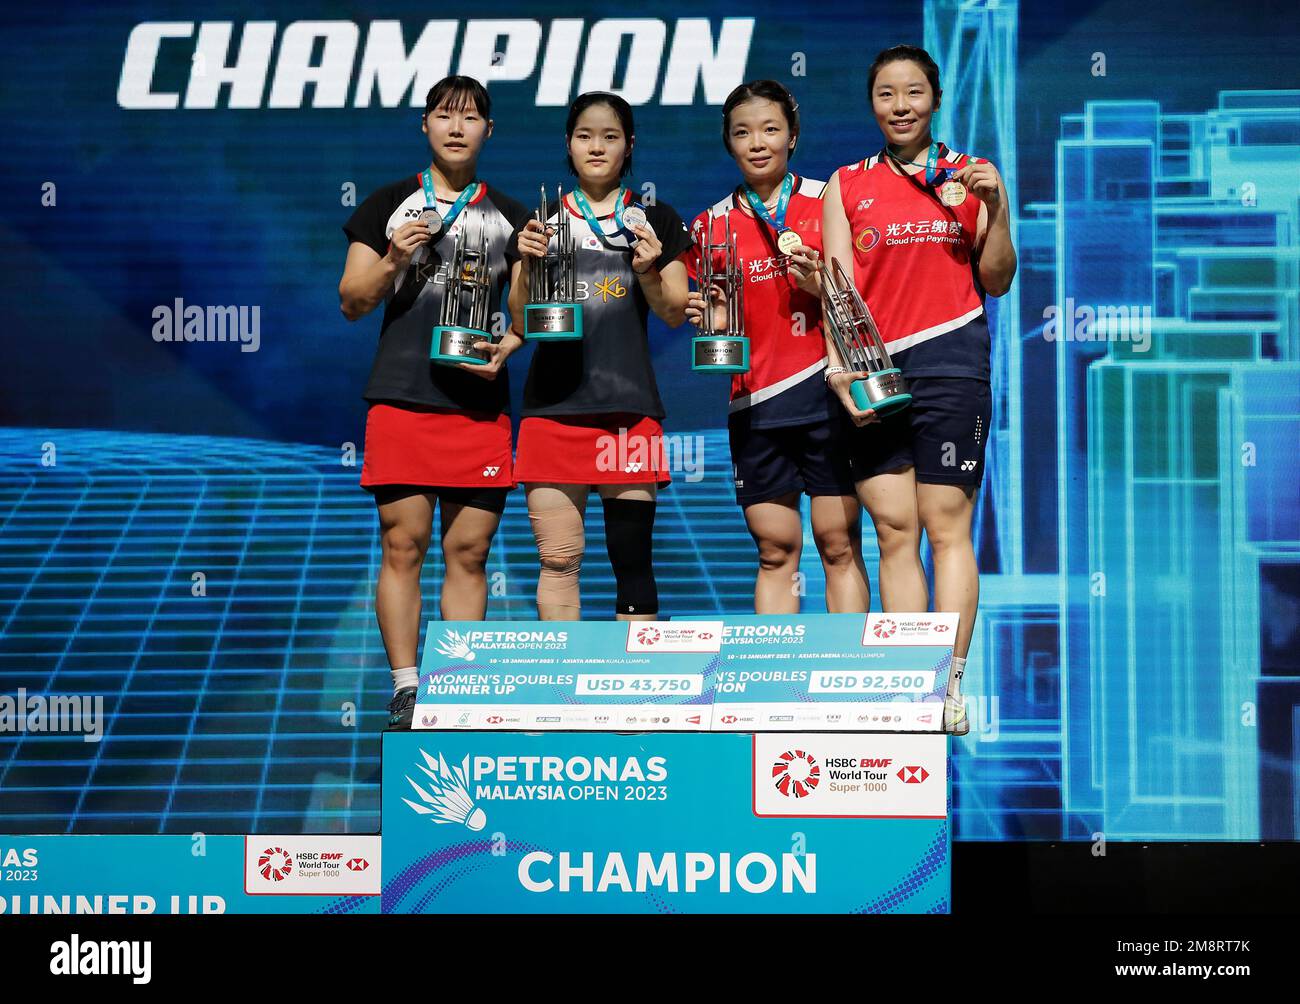 Kuala Lumpur, Malaysia. 15th Jan, 2023. Chen Qing Chen (R1) and Jia Yi Fan (R) of China with second-placed Back Ha Na (L2) and Lee You Lim (L) of Korea pose for photo with their medals at the medal ceremony for the Women Doubles Finals match of the Petronas Malaysia Open 2023 at Axiata Arena.Chen Qing Chen and Jia Yi Fan of China won with scores; 21/21 : 16/10 Credit: SOPA Images Limited/Alamy Live News Stock Photo